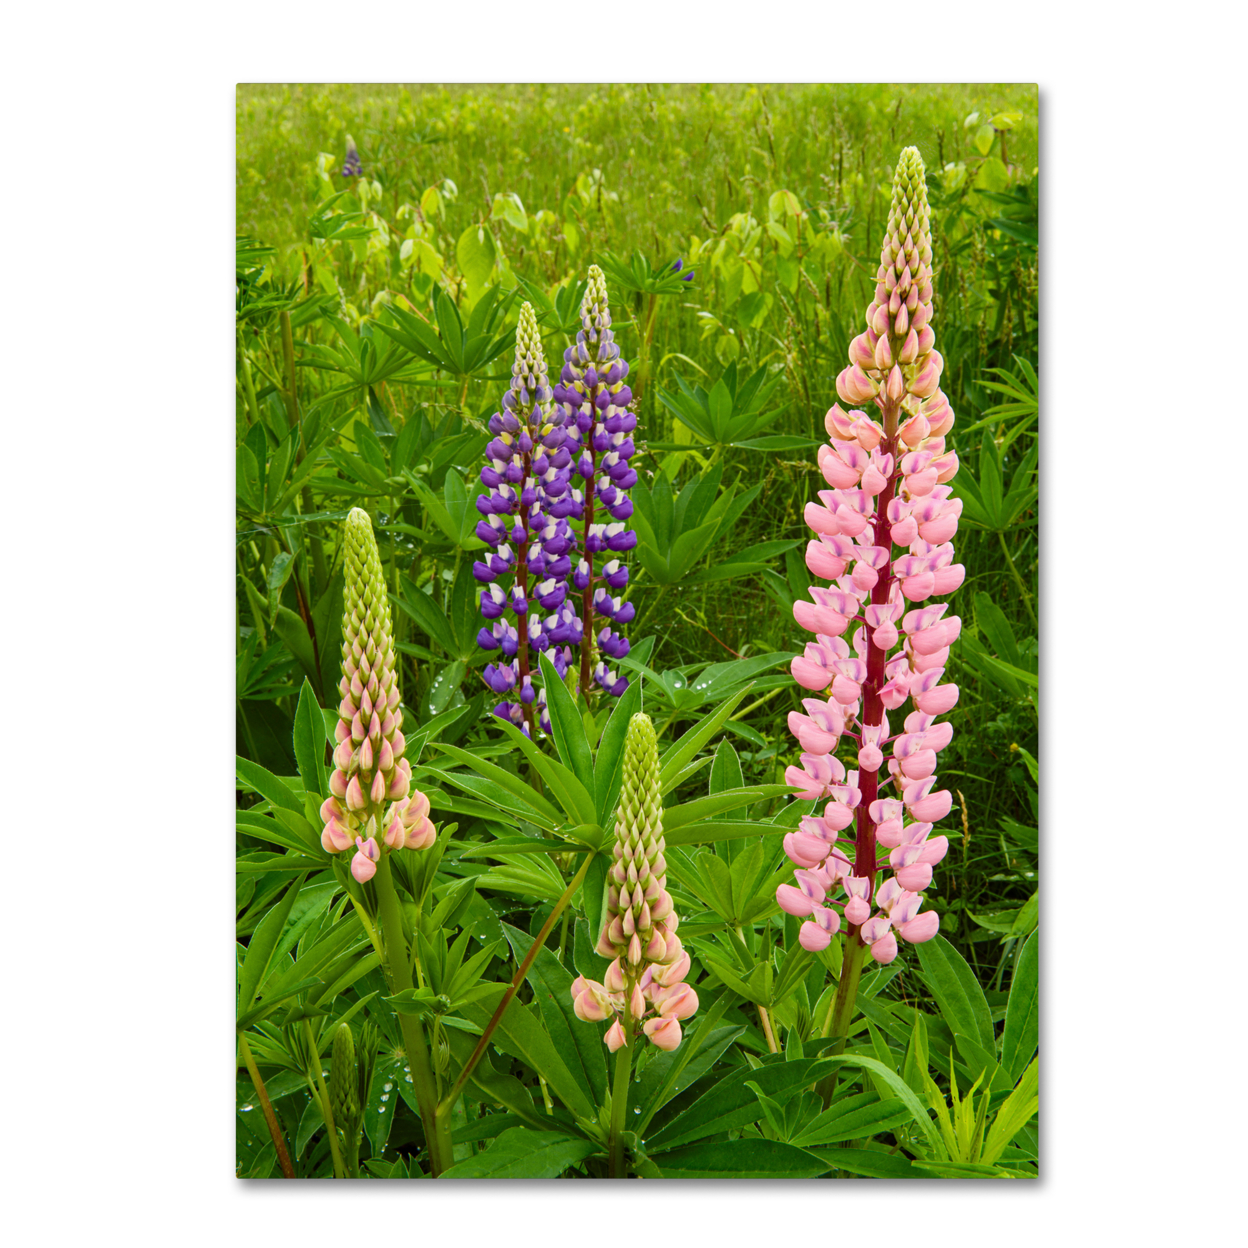 Michael Blanchette Photography 'Lupine Family' Canvas Wall Art 35 X 47 Inches